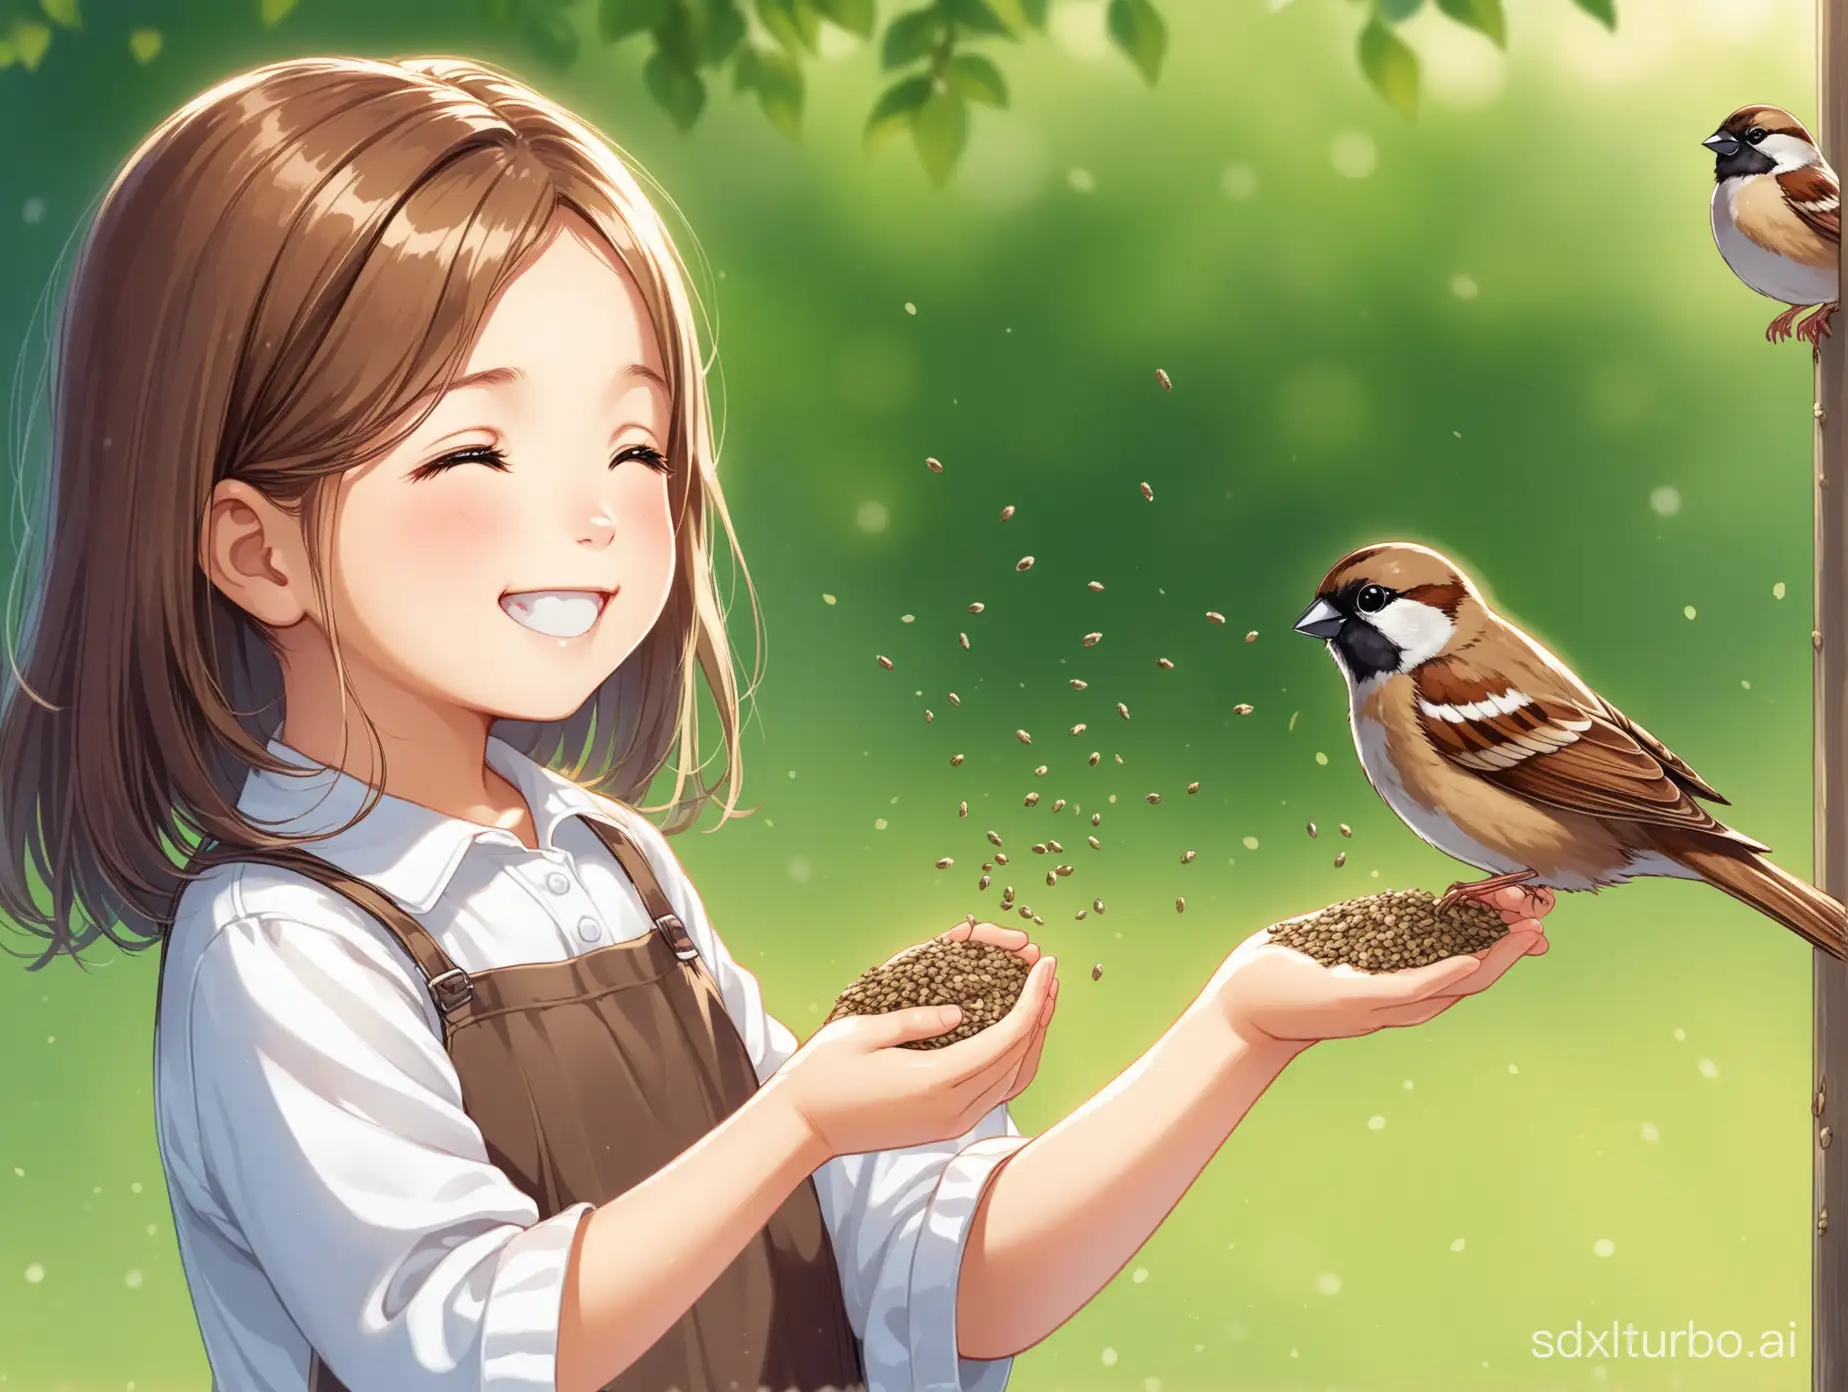 a girl child about 8 years old . everyday wear, look happy.The sparrow pecks at the birdseed in her hand.